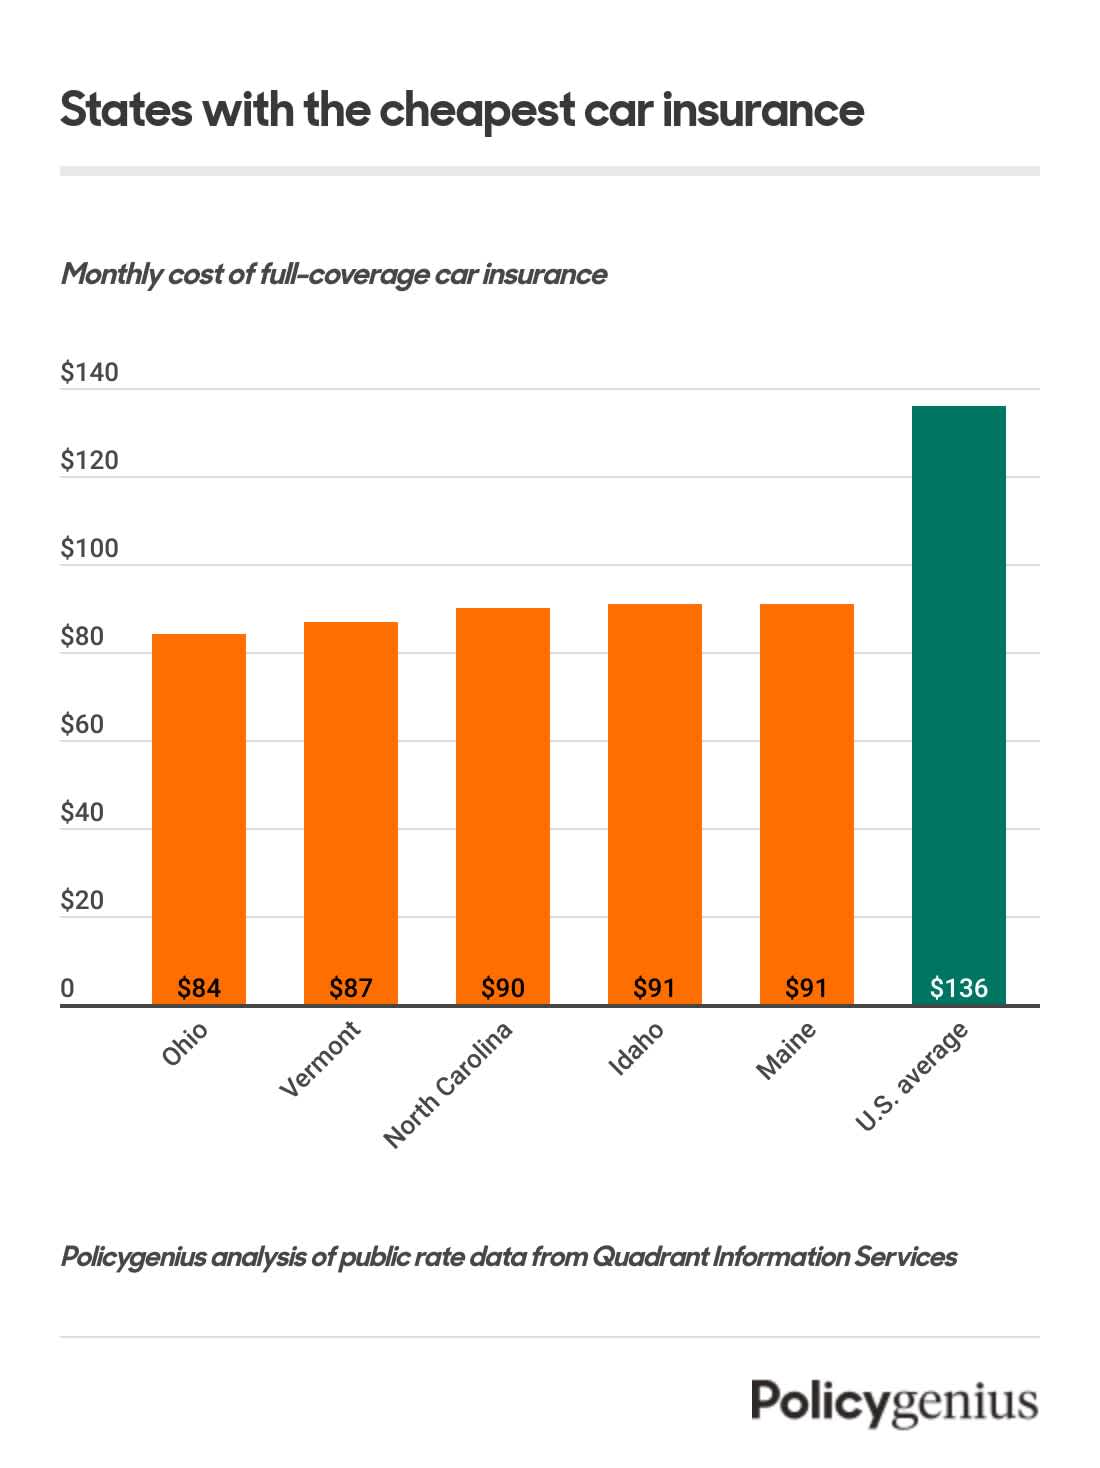 A bar graph showing the states that have the cheapest average costs of car insurance. Displayed are Ohio, Vermont, North Carolina, Idaho, and Maine.